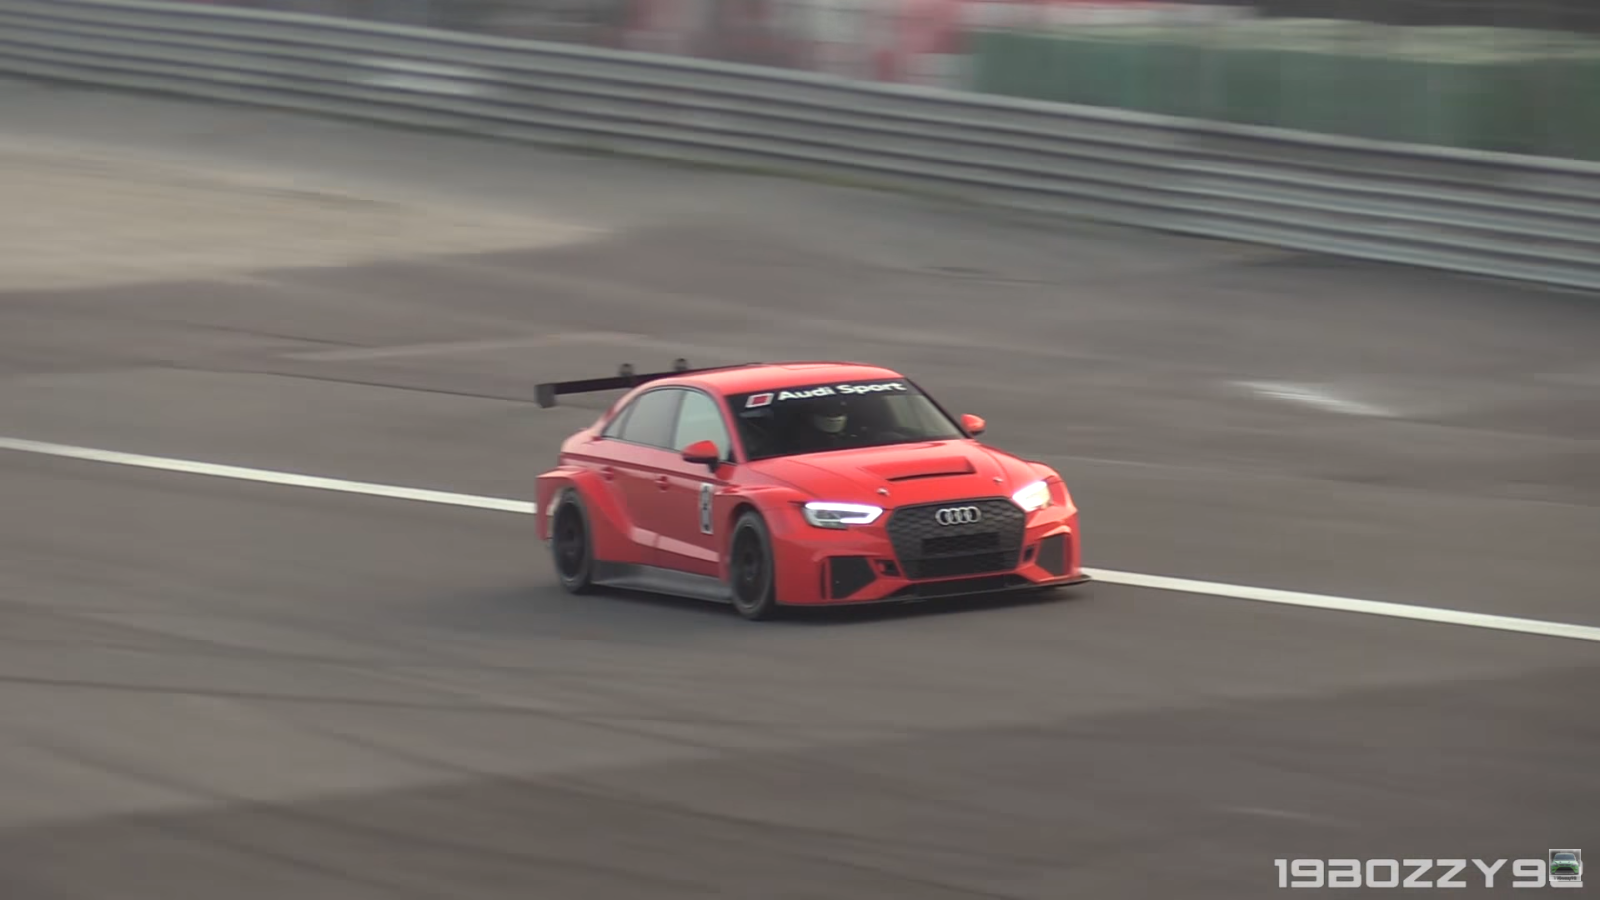 Here’s a Look at the 2017 Audi RS3 LMS TCR